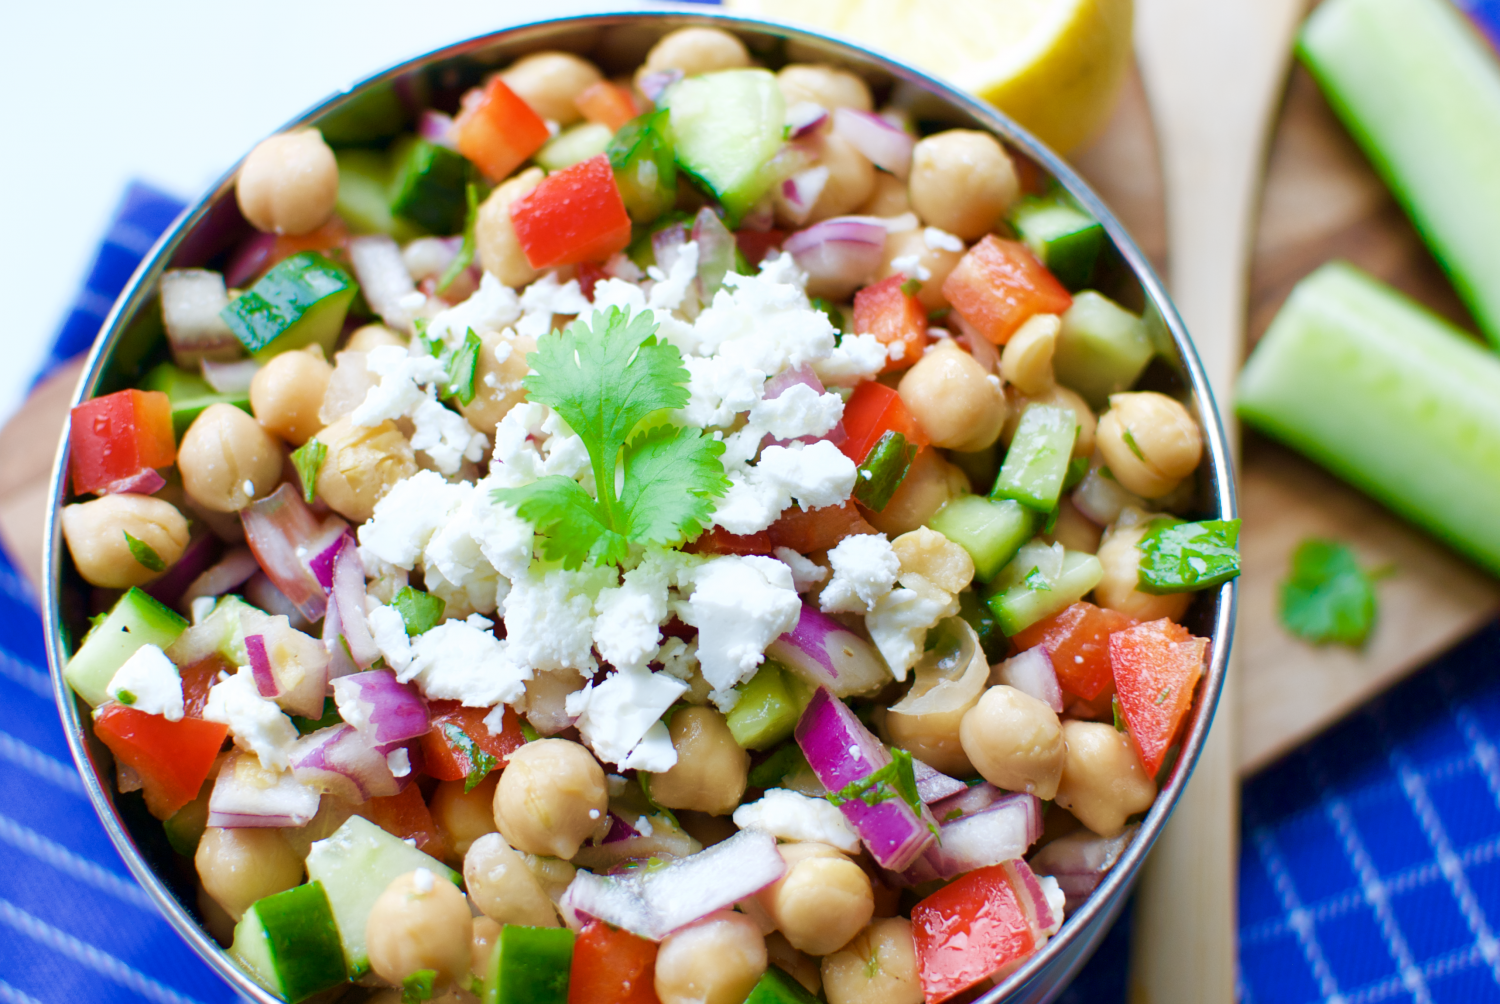 Delicious and protein-rich chickpea salad - perfect for foodprepping!